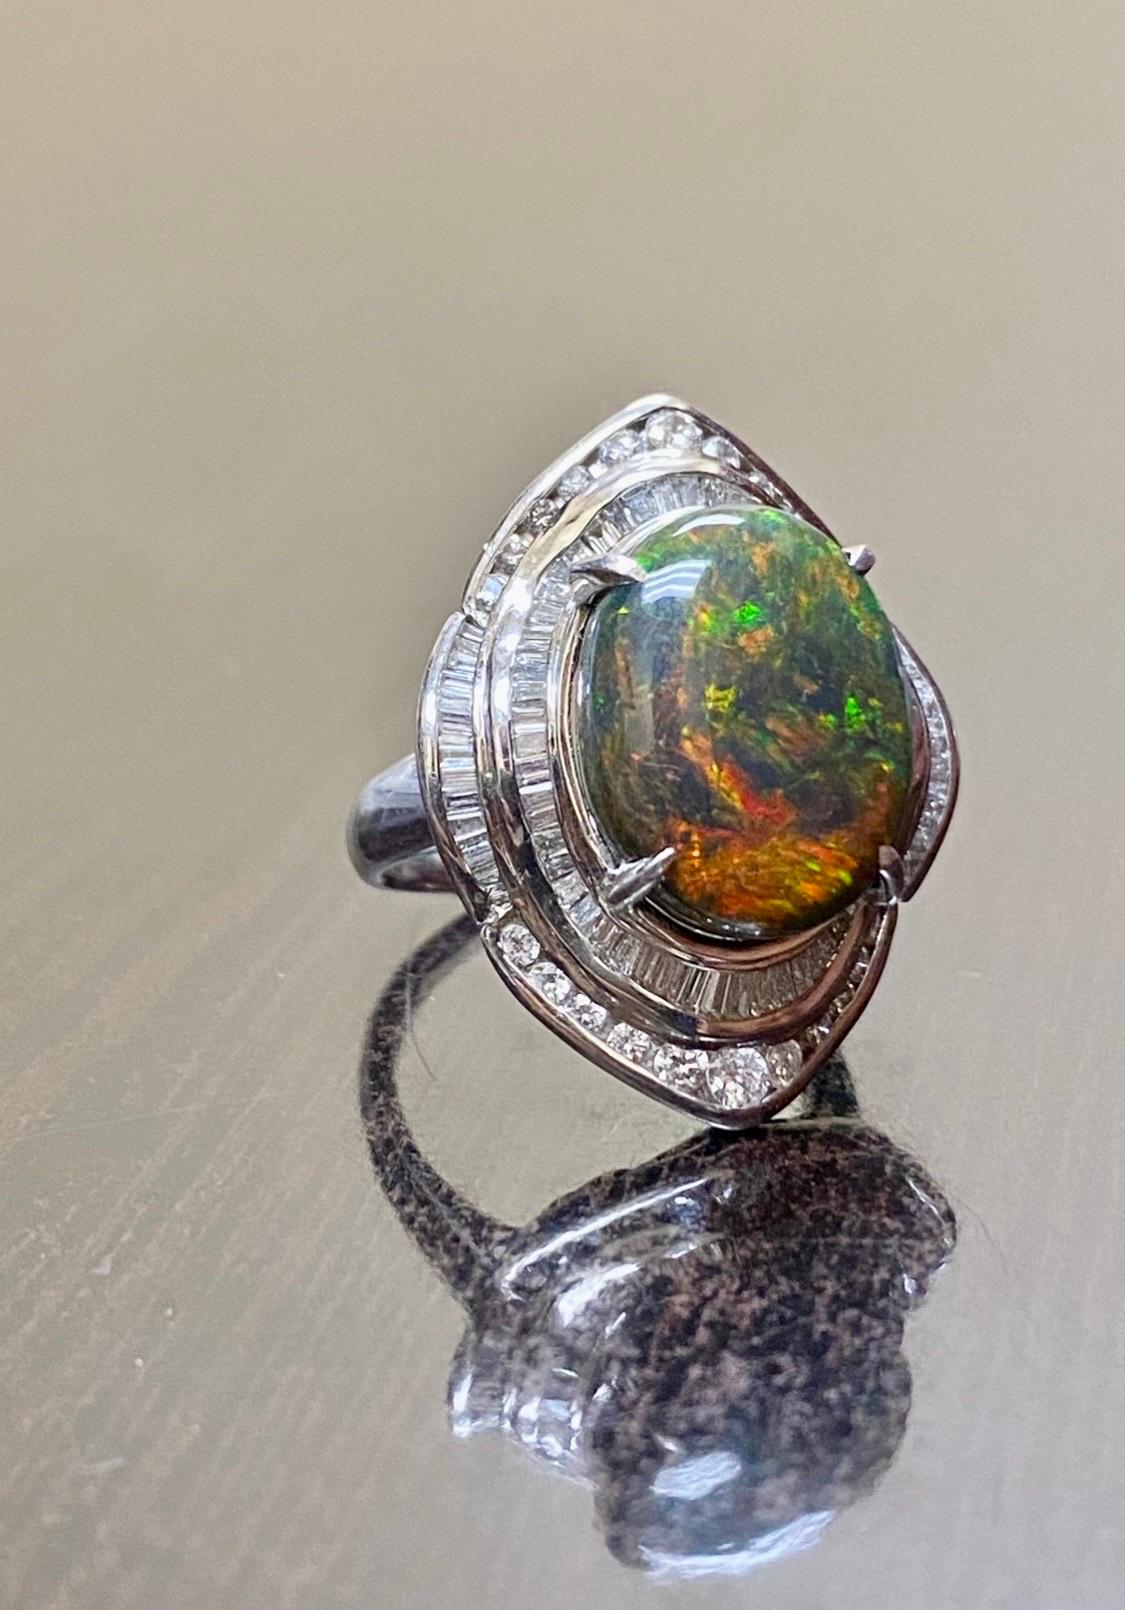 DeKara Designs Collection

Our latest design! An entirely handmade ONE OF A KIND elegant and lustrous Lightning Ridge Australian Black Opal cabochon surrounded by beautiful baguette diamonds in a platinum setting.

Metal- 90% Platinum, 10%